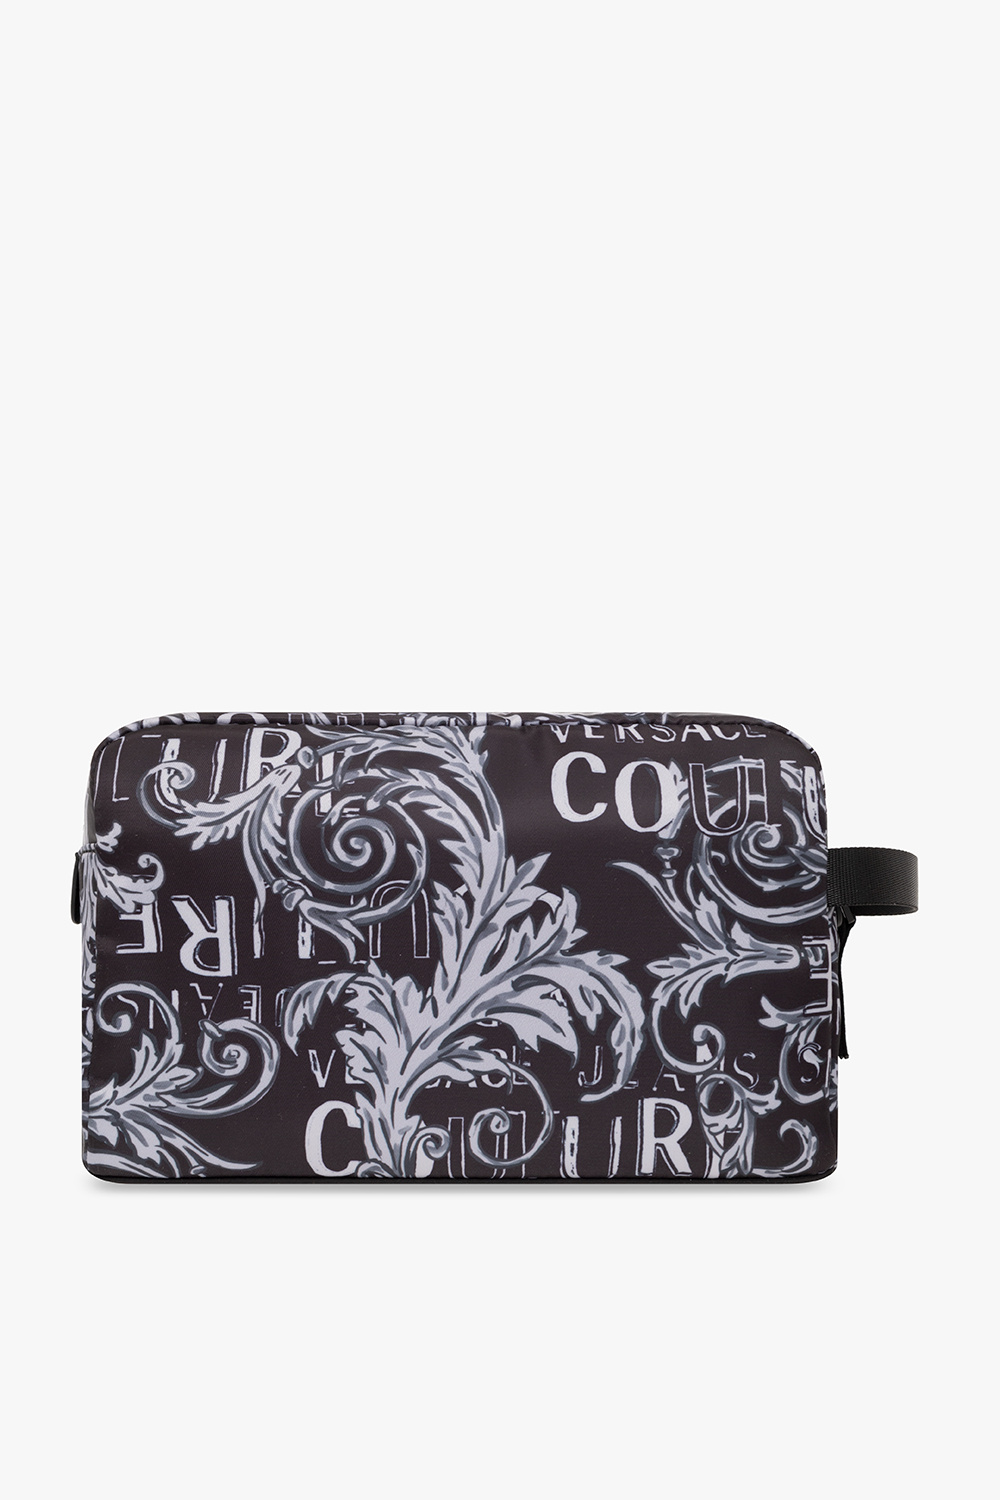 Versace jeans Polo Couture Patterned handbag